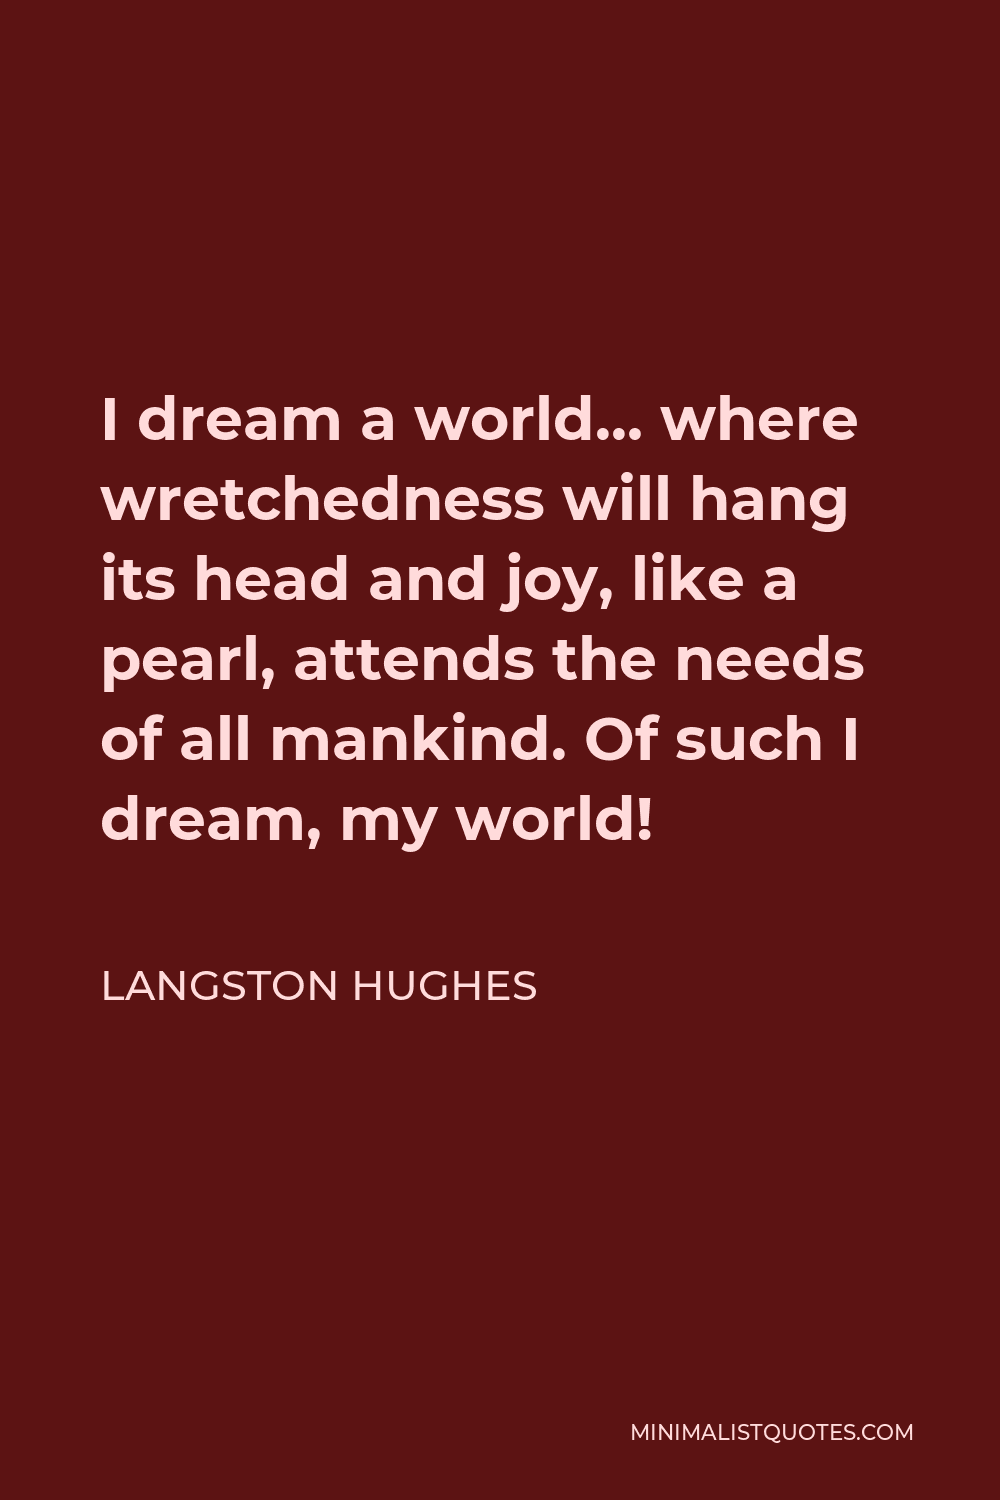 Langston Hughes Quote - I dream a world… where wretchedness will hang its head and joy, like a pearl, attends the needs of all mankind. Of such I dream, my world!